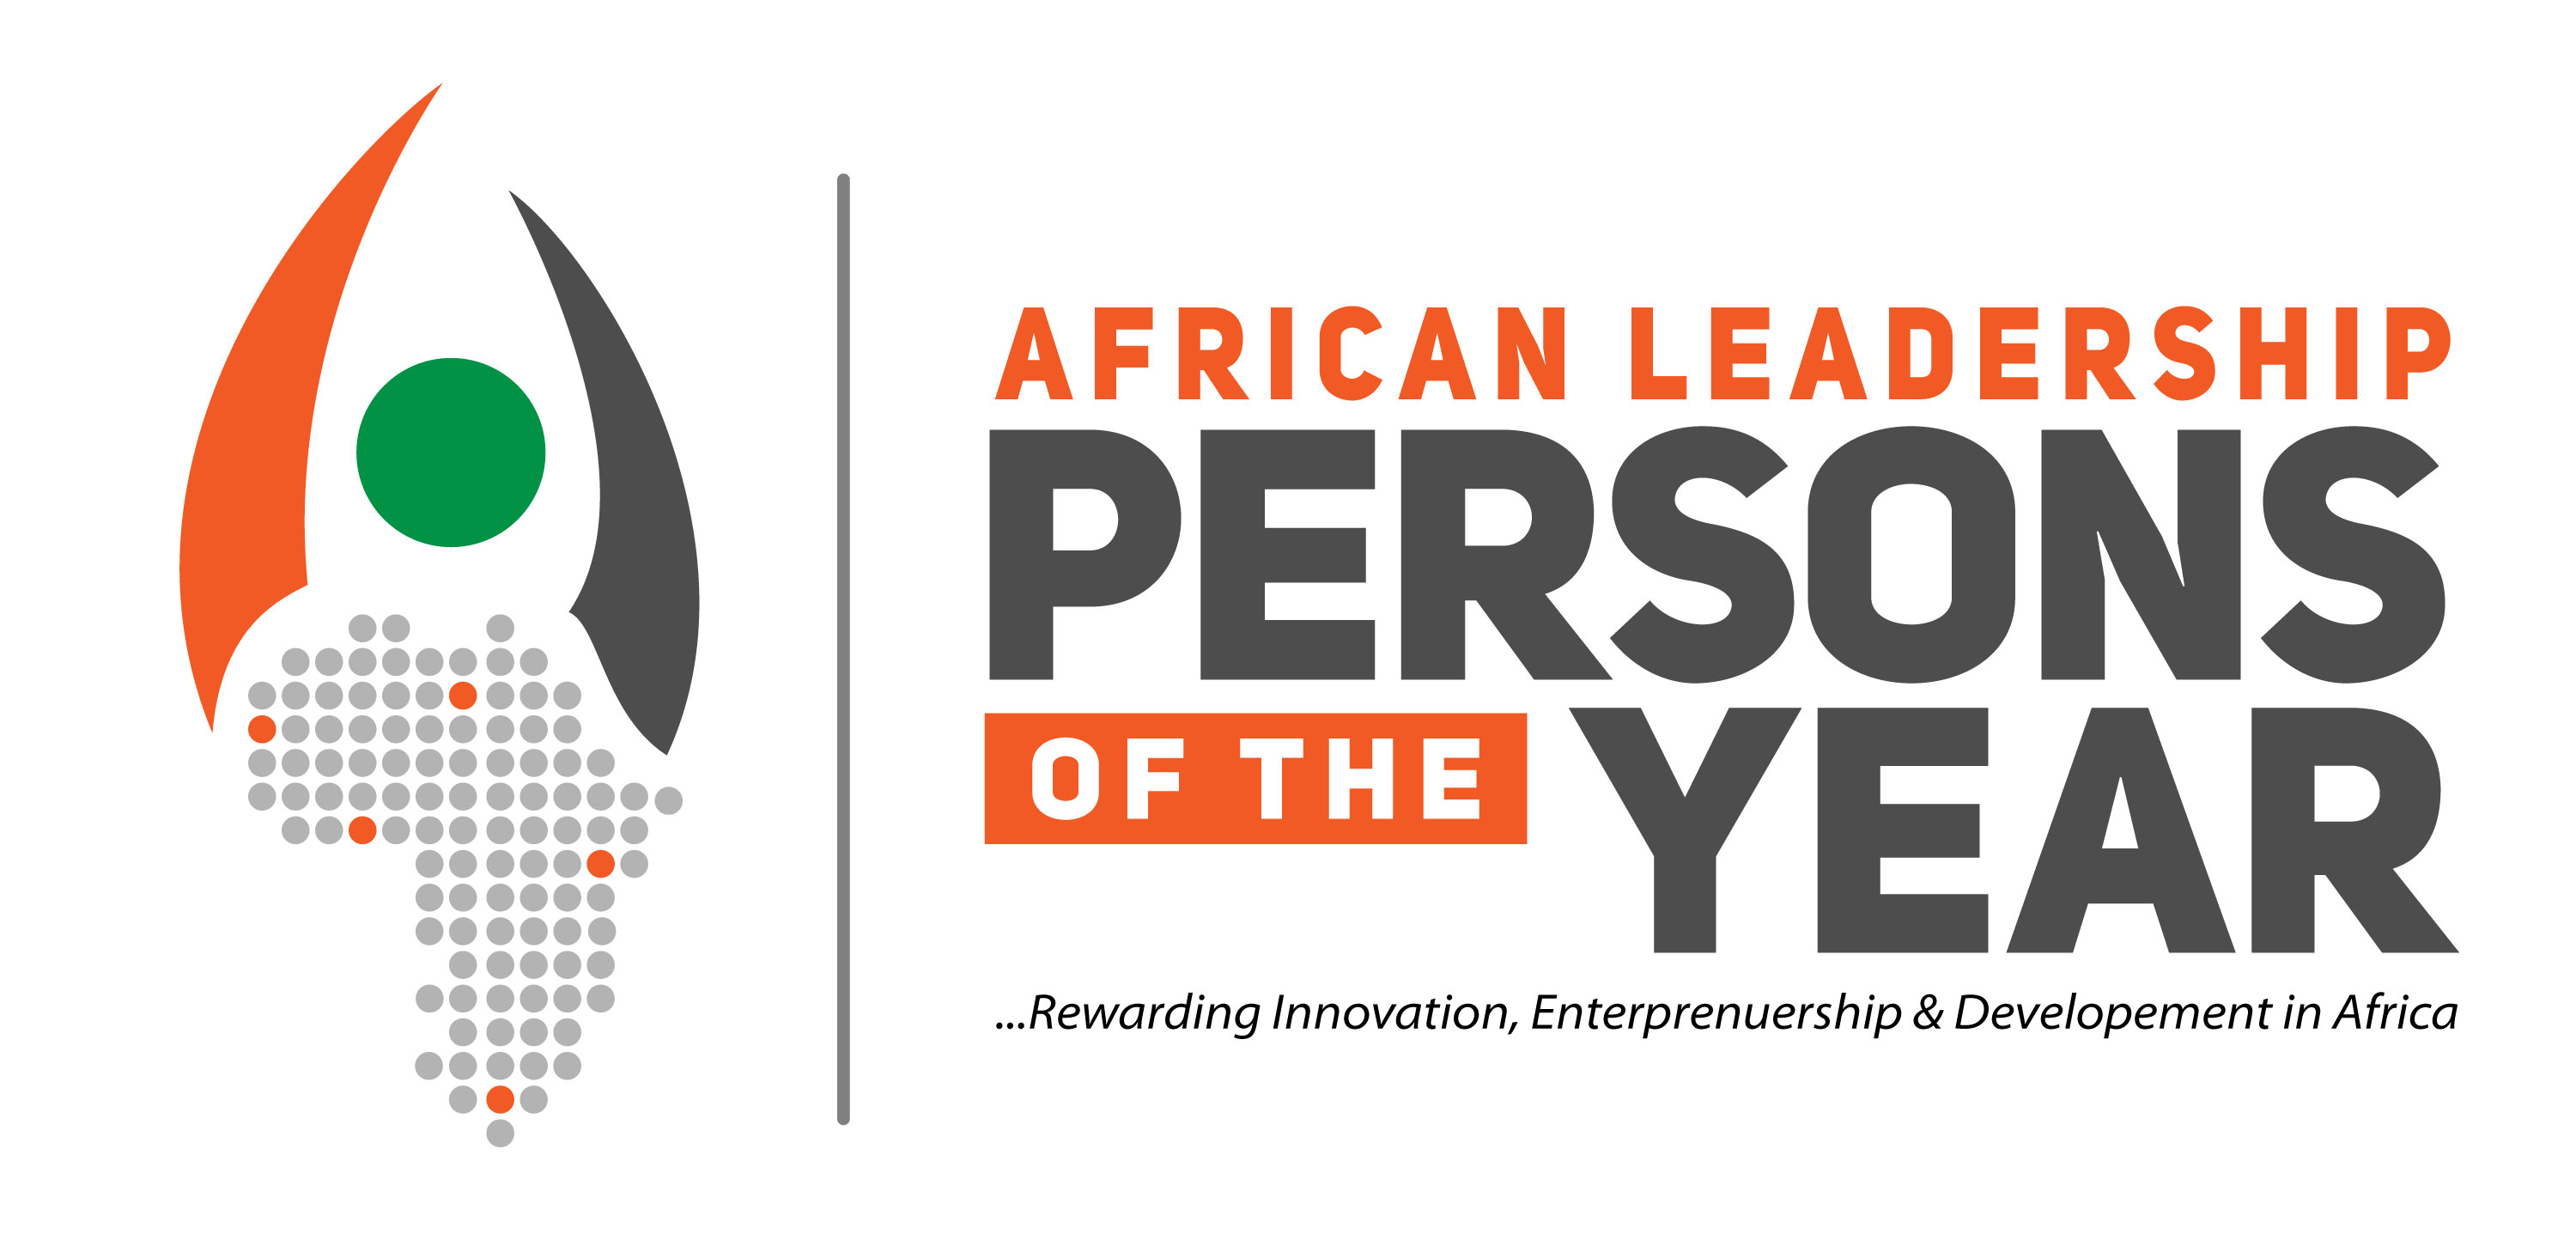 NOMINATION OPENS FOR AFRICAN LEADERSHIP MAGAZINE PERSONS OF THE YEAR 2019